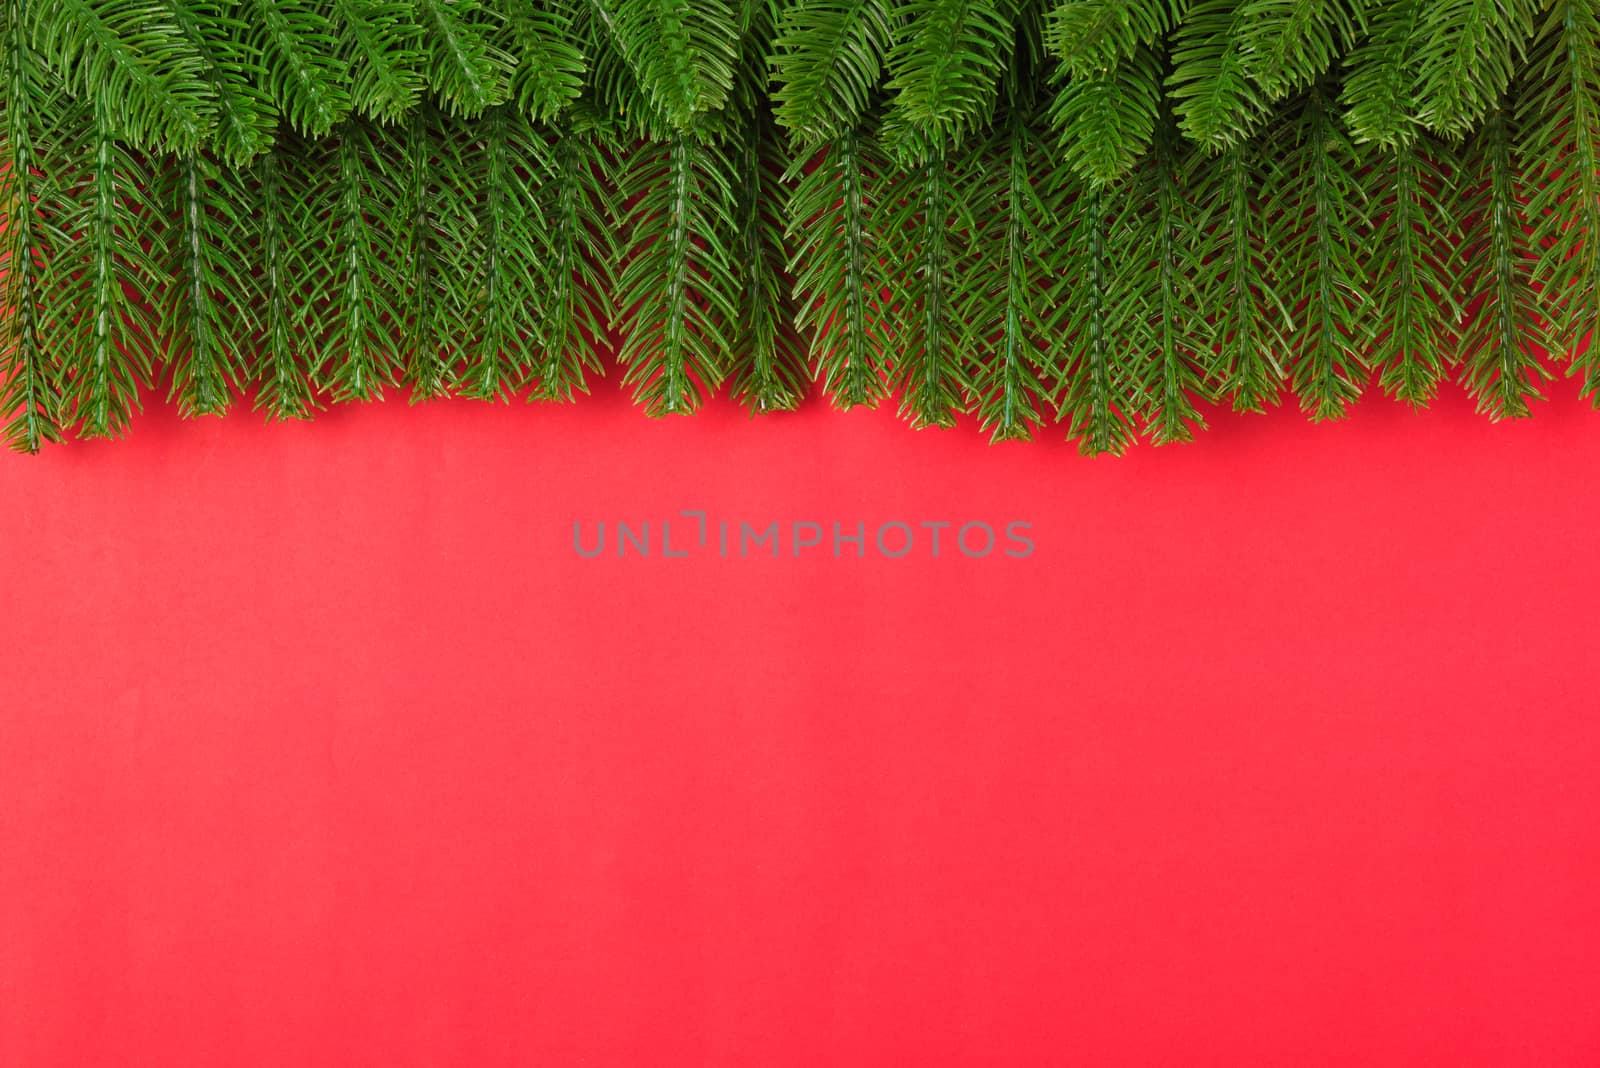 Happy new year or christmas day top view flat lay fir tree branches on red background with copy space for your text